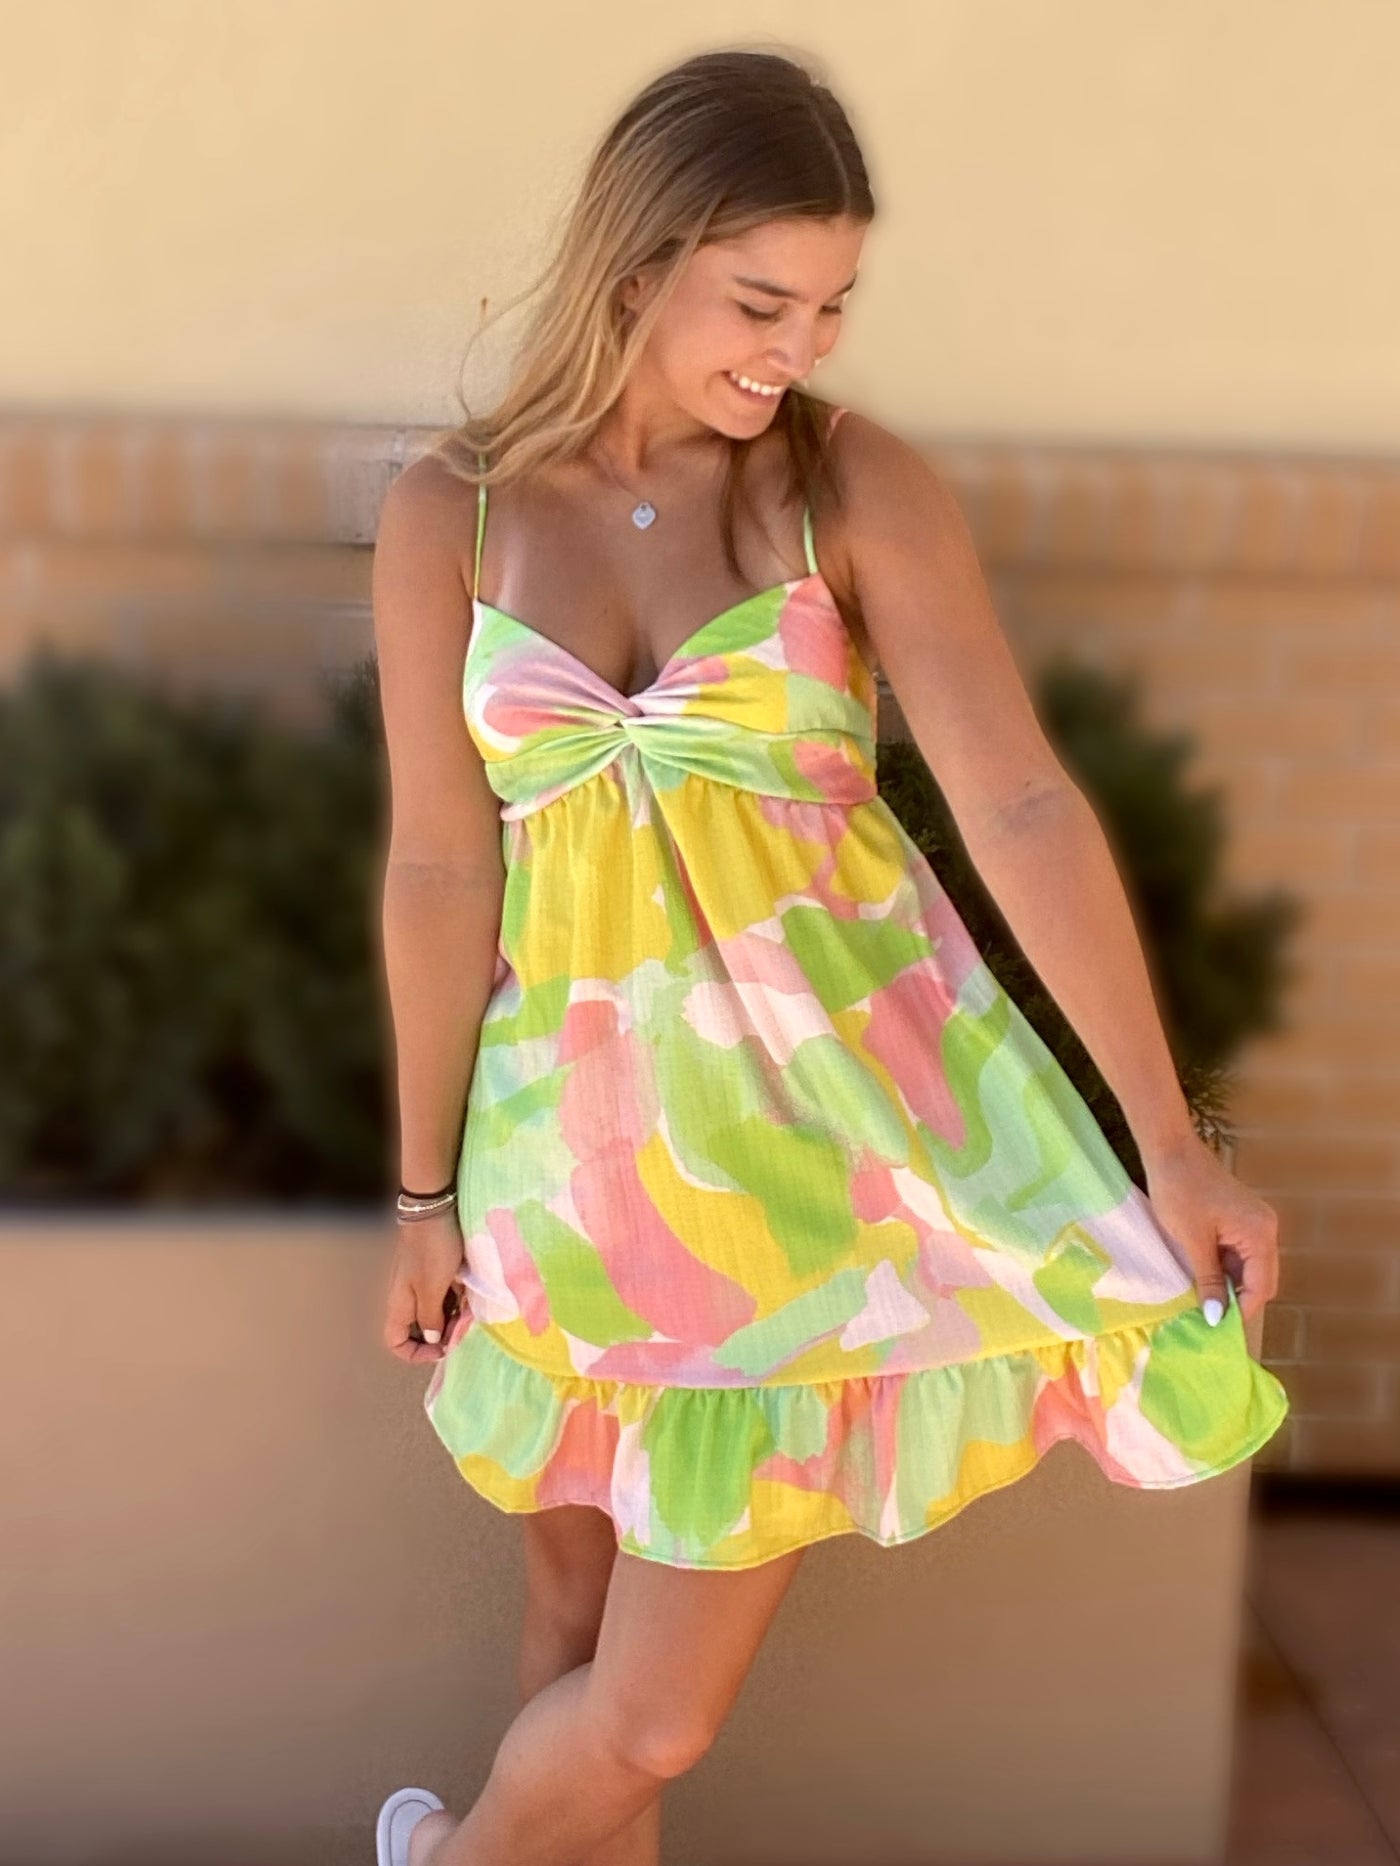 JENNA LOOKING DOWNWARDS IN DRESS